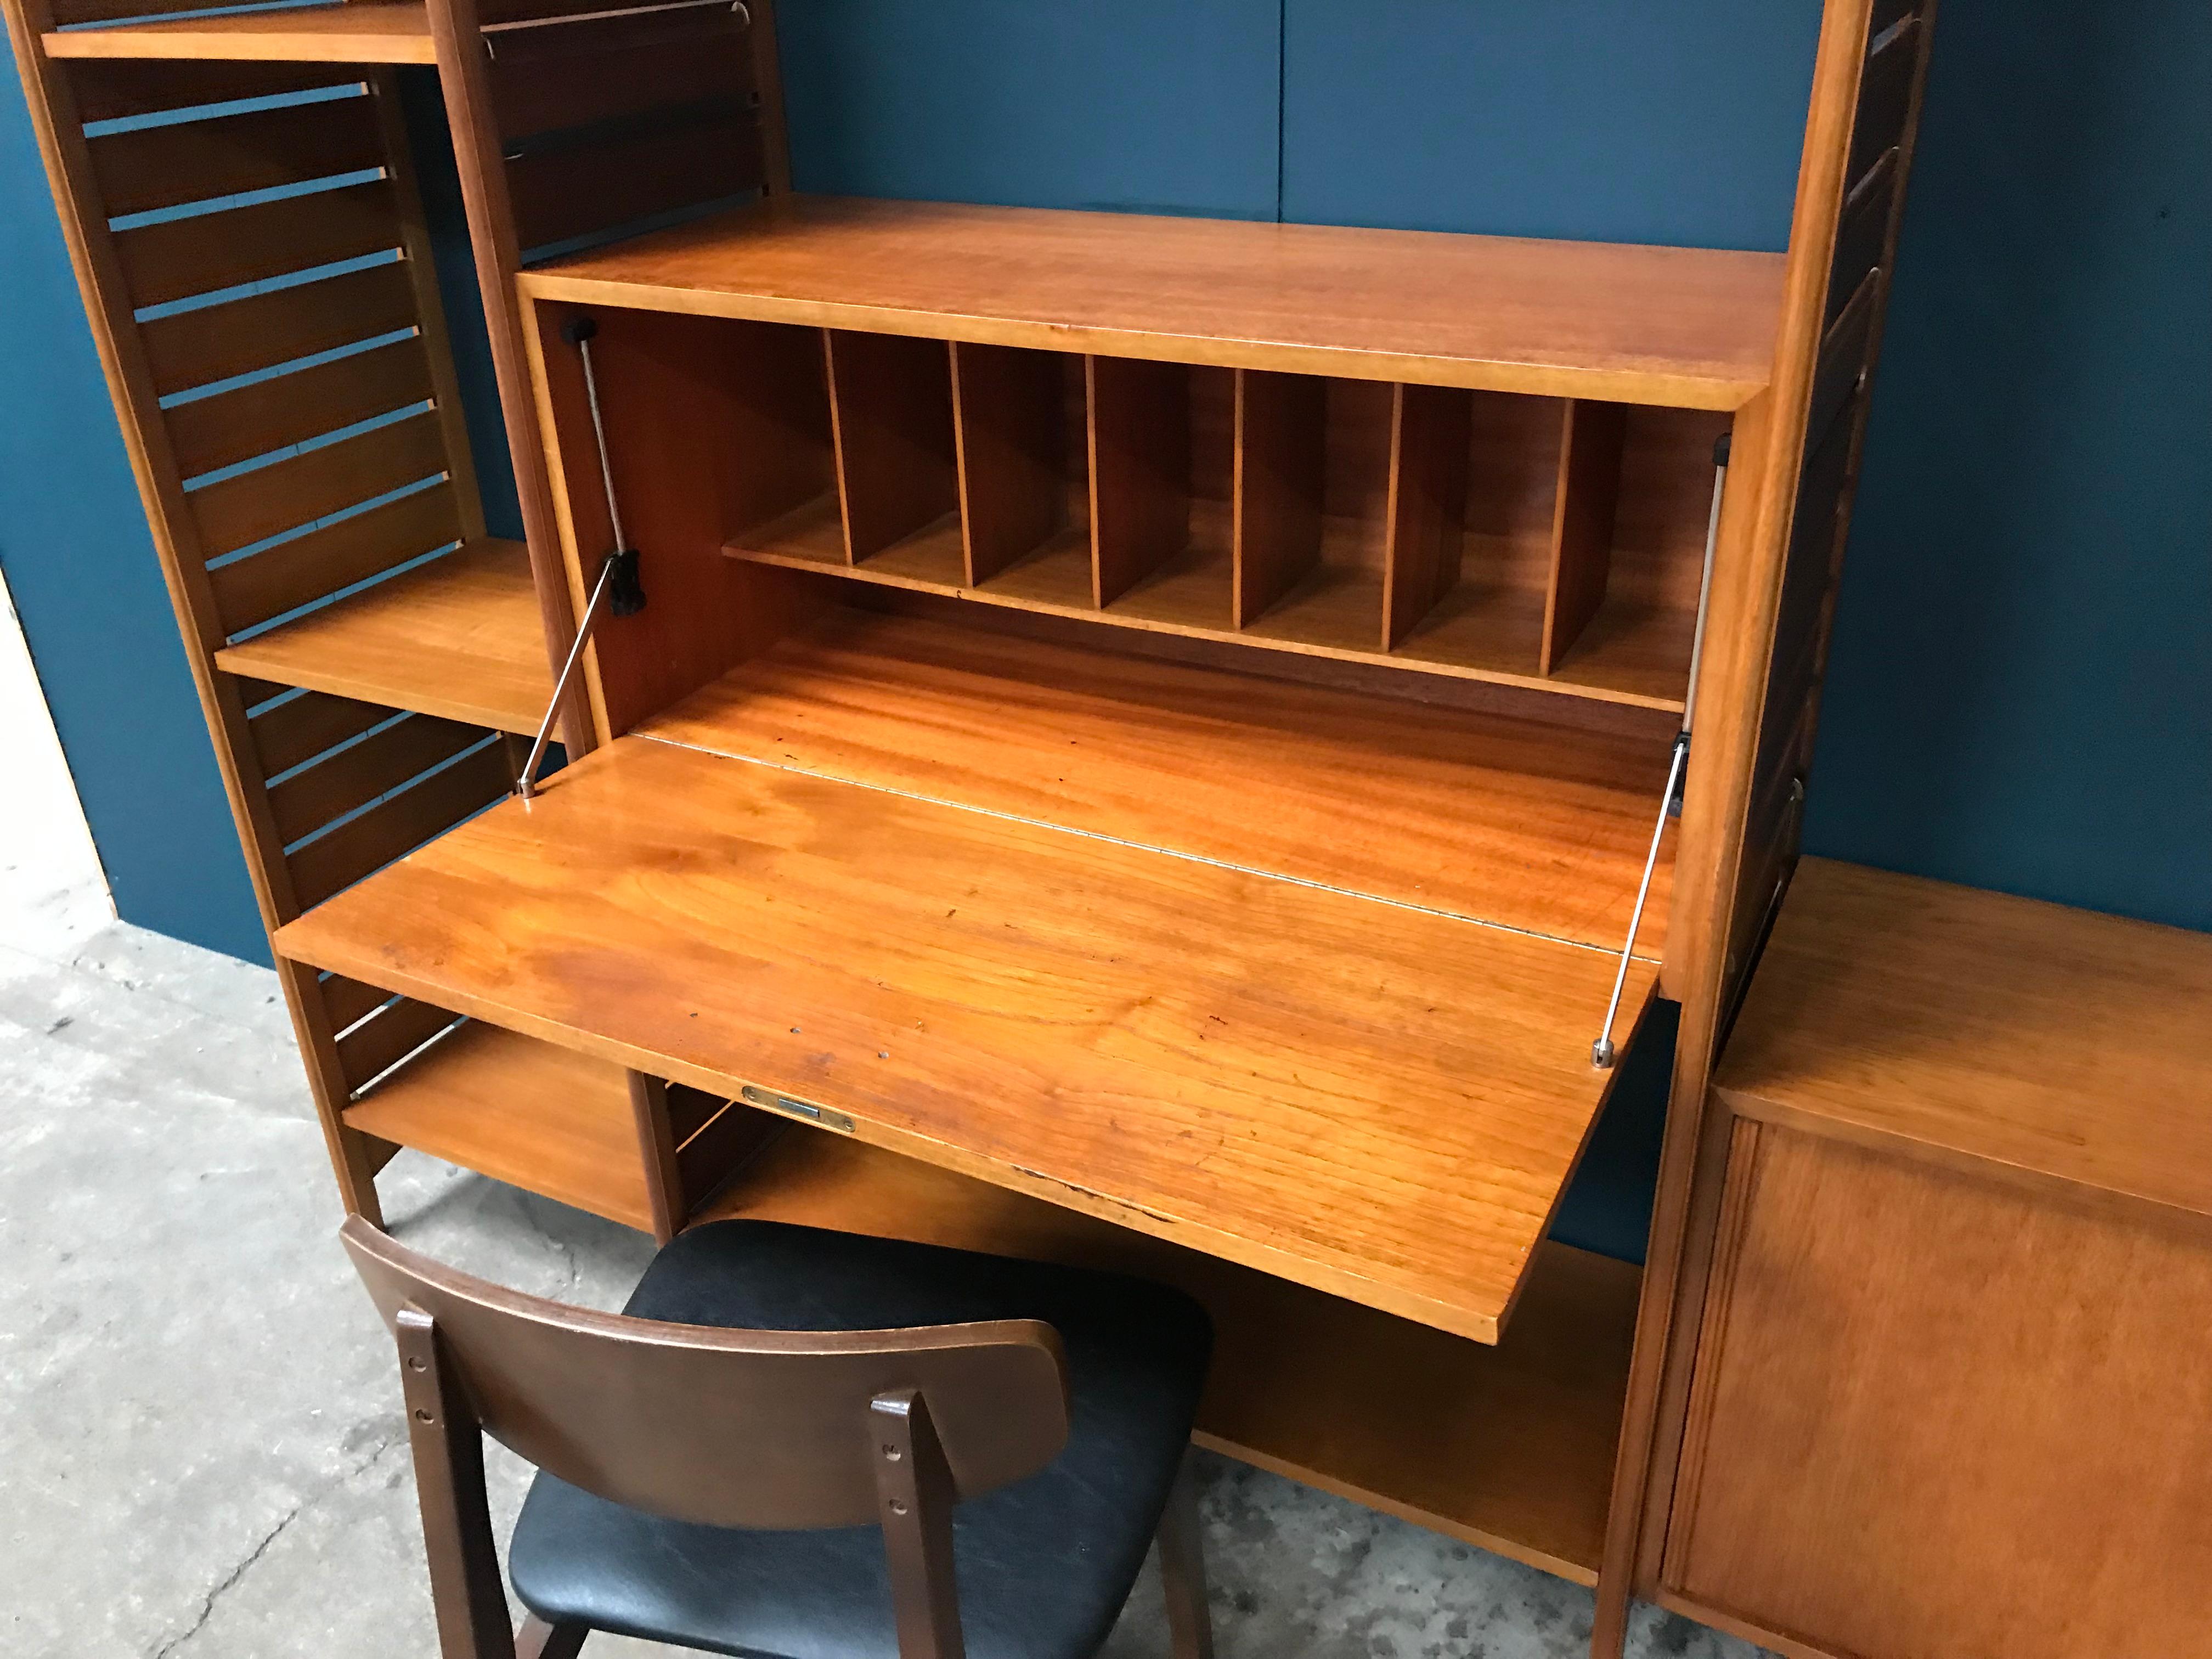 20th Century 5-Bay Ladderax Teak Midcentury Shelving System by Robert Heal for Staples For Sale